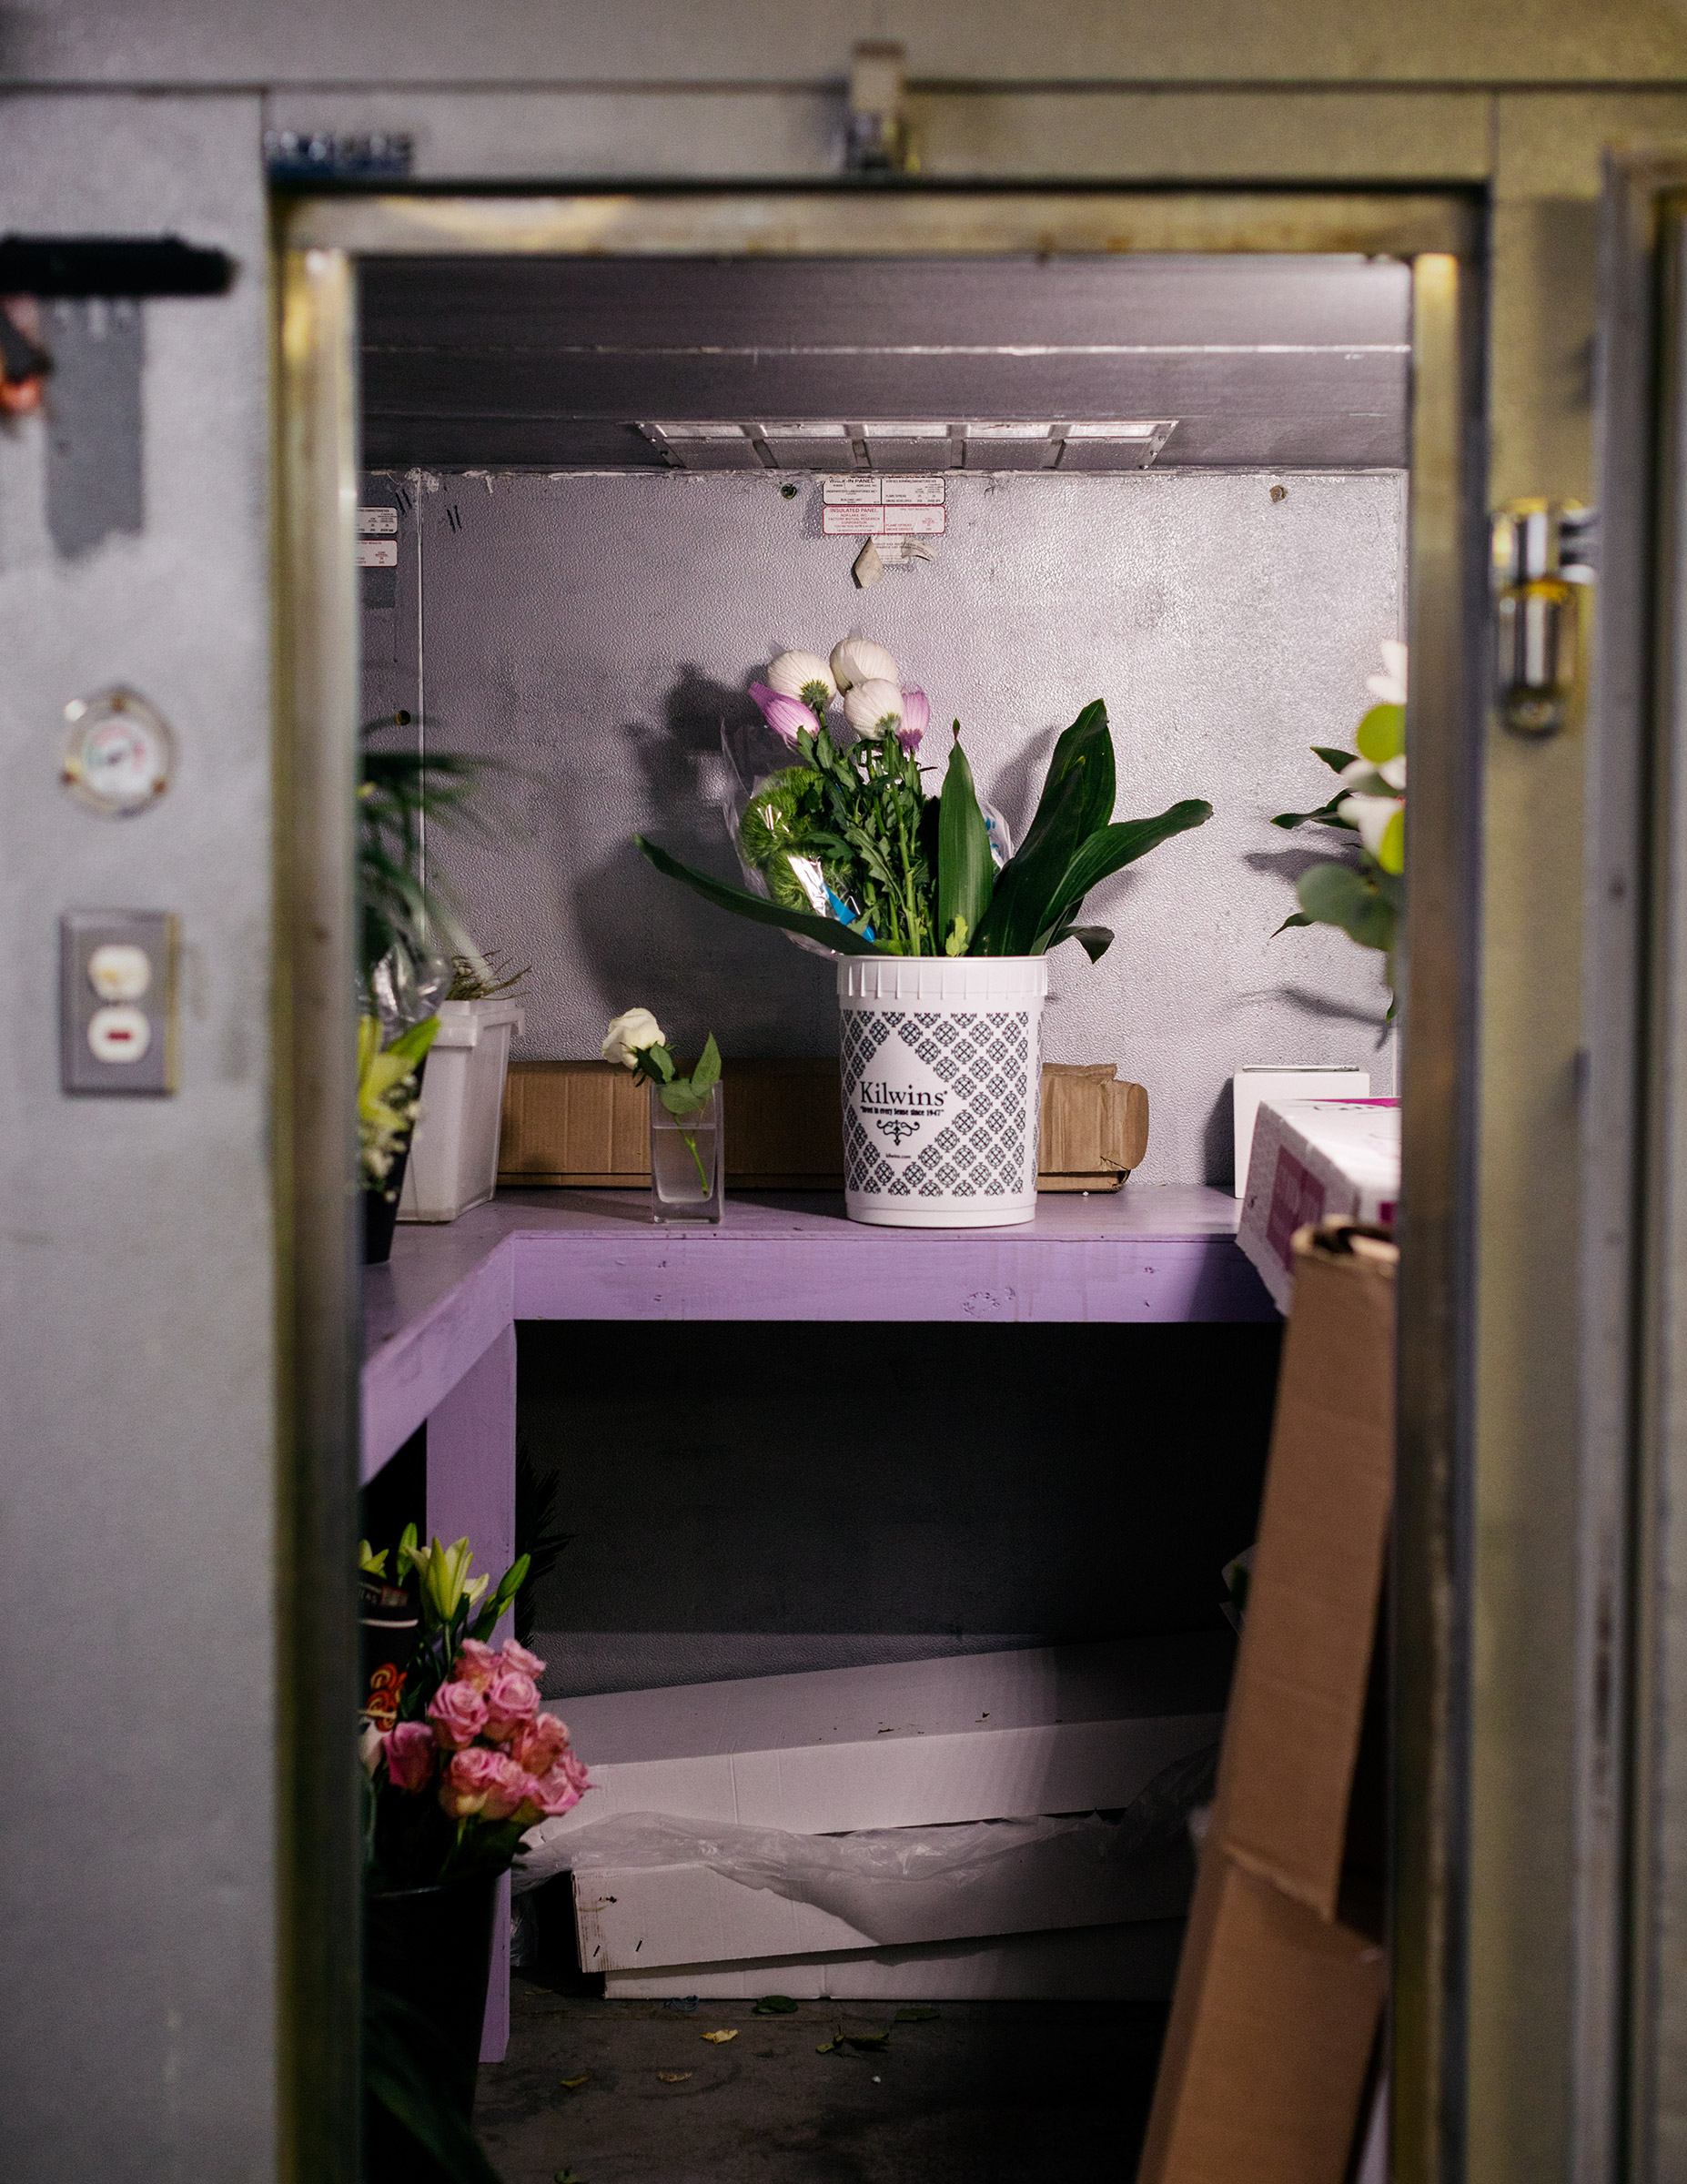 A bucket of flowers sit in a sparse walk-in freezer that is usually filled to the brim. (Rose Marie Cromwell for TIME)